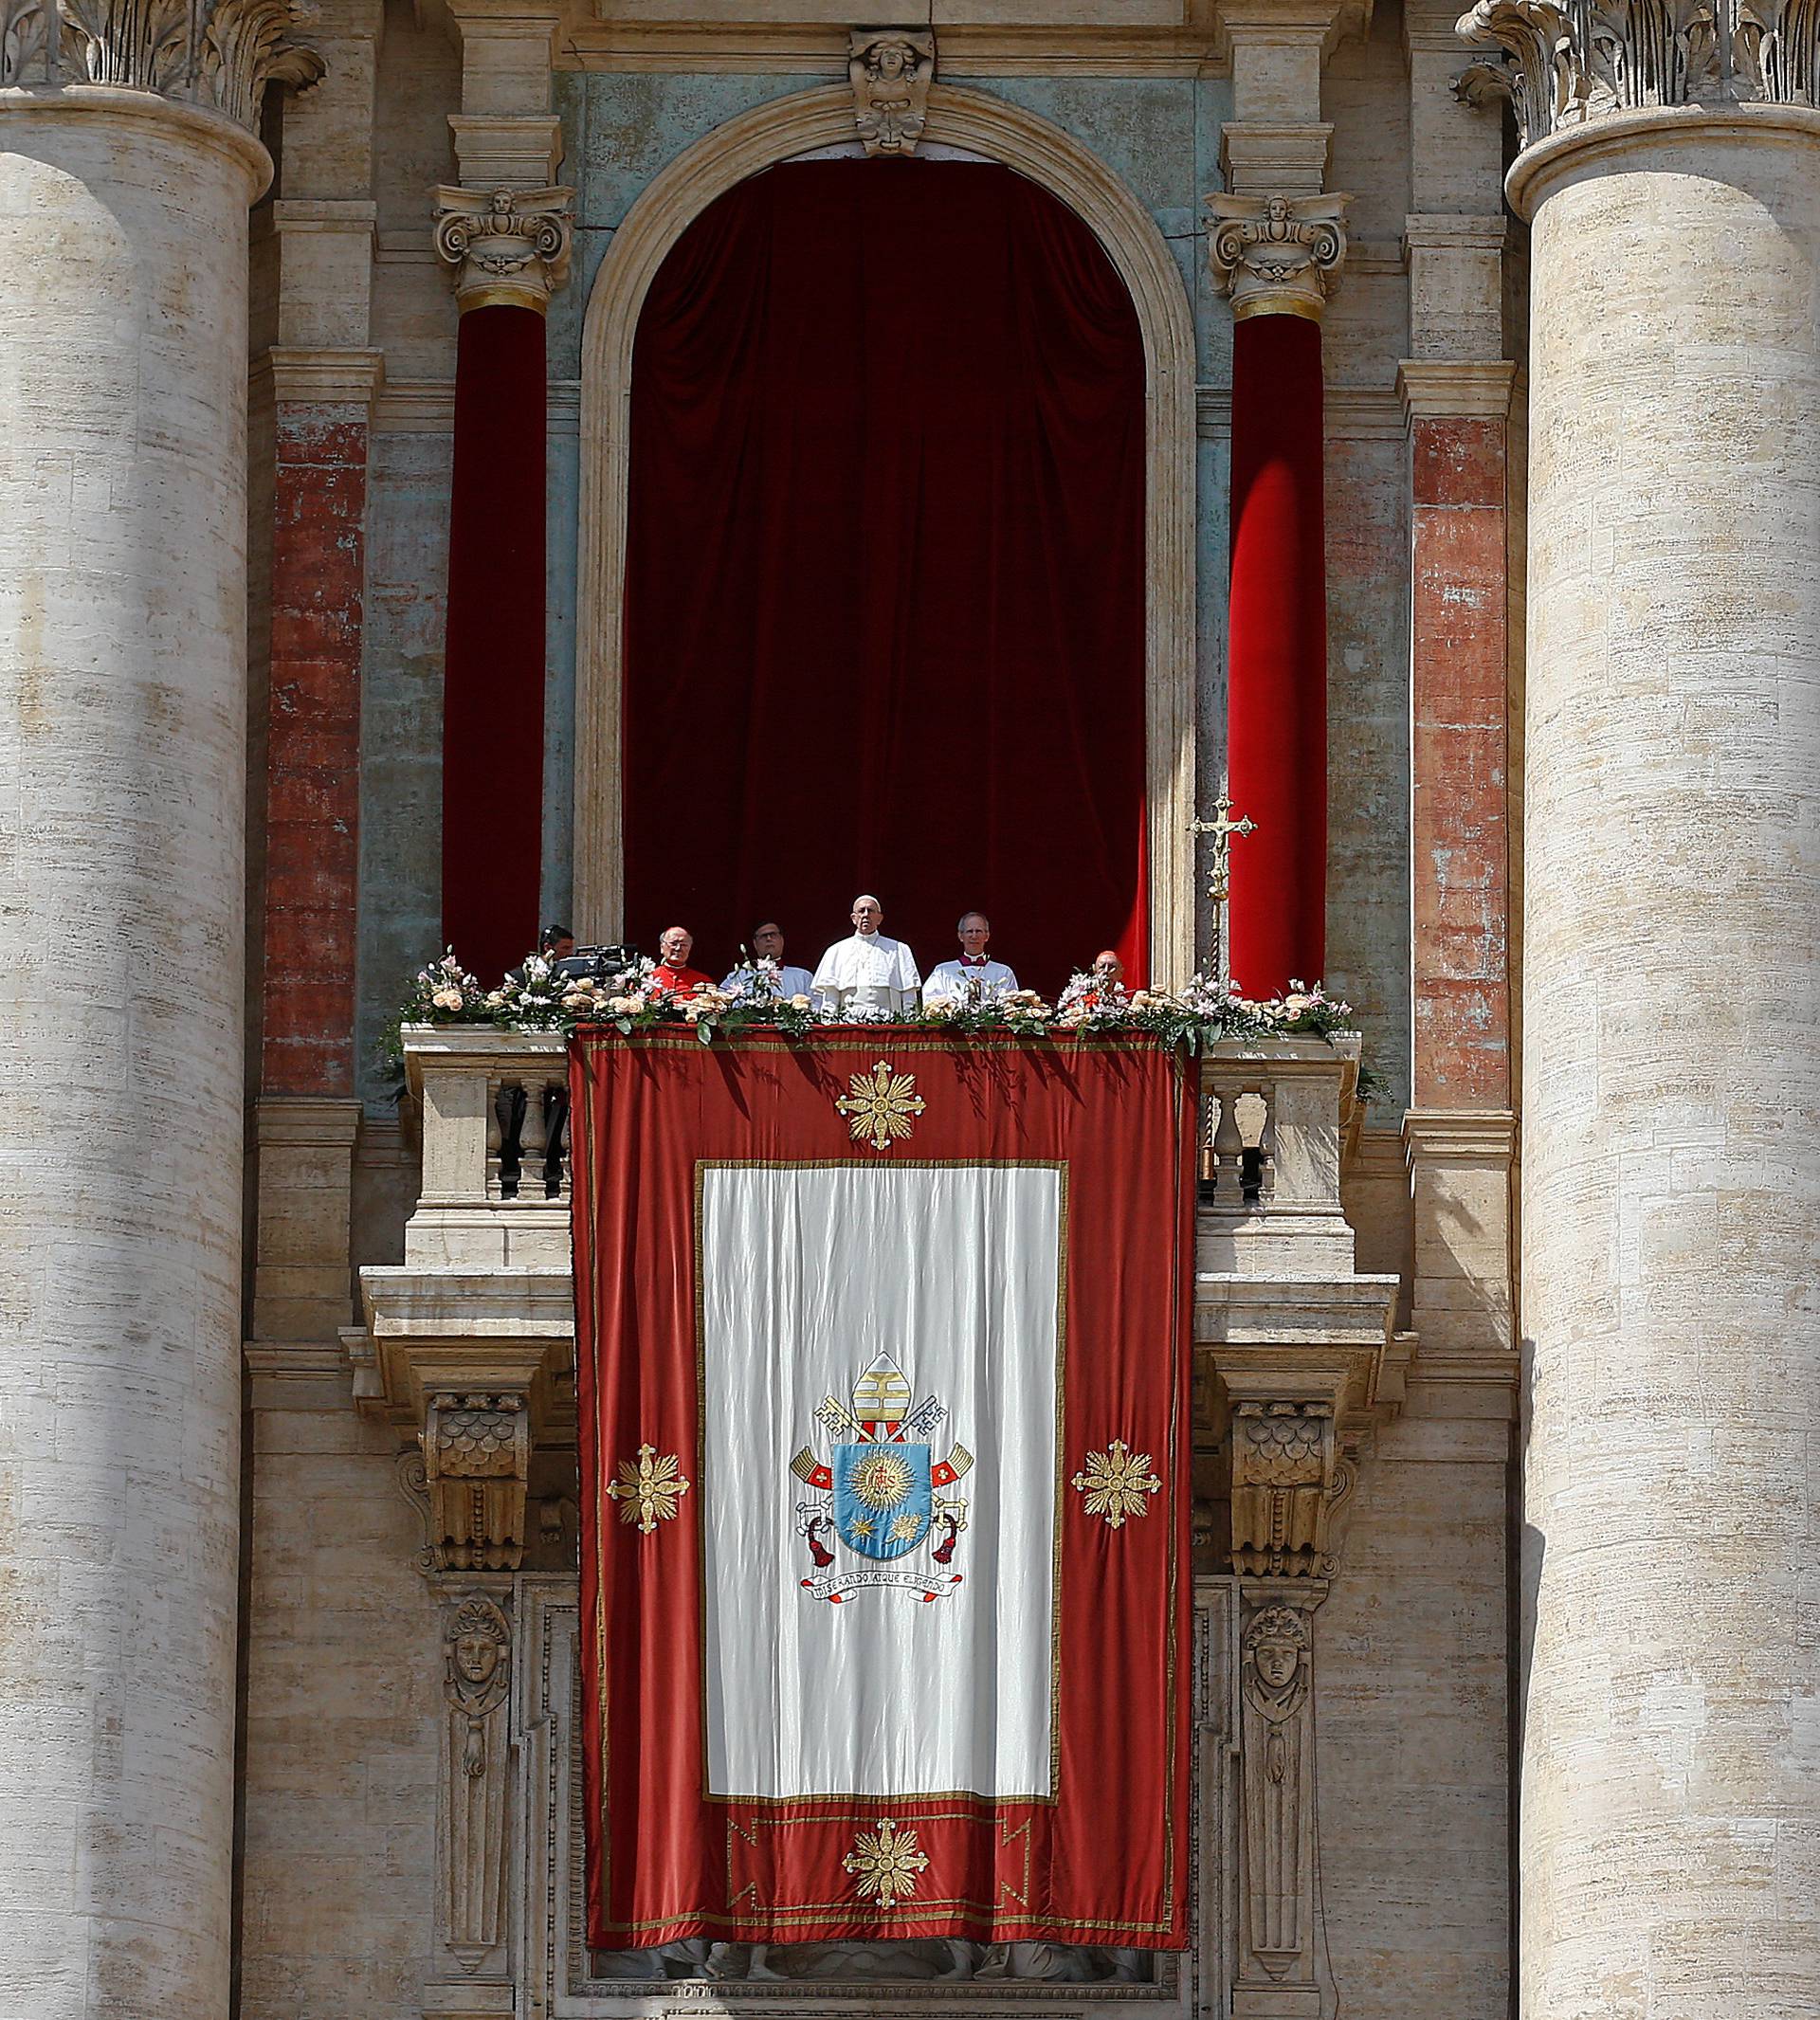 Pope Francis looks on before delivering his "Urbi et Orbi" (to the city and the world) message from the balcony overlooking St. Peter's Square at the Vatican